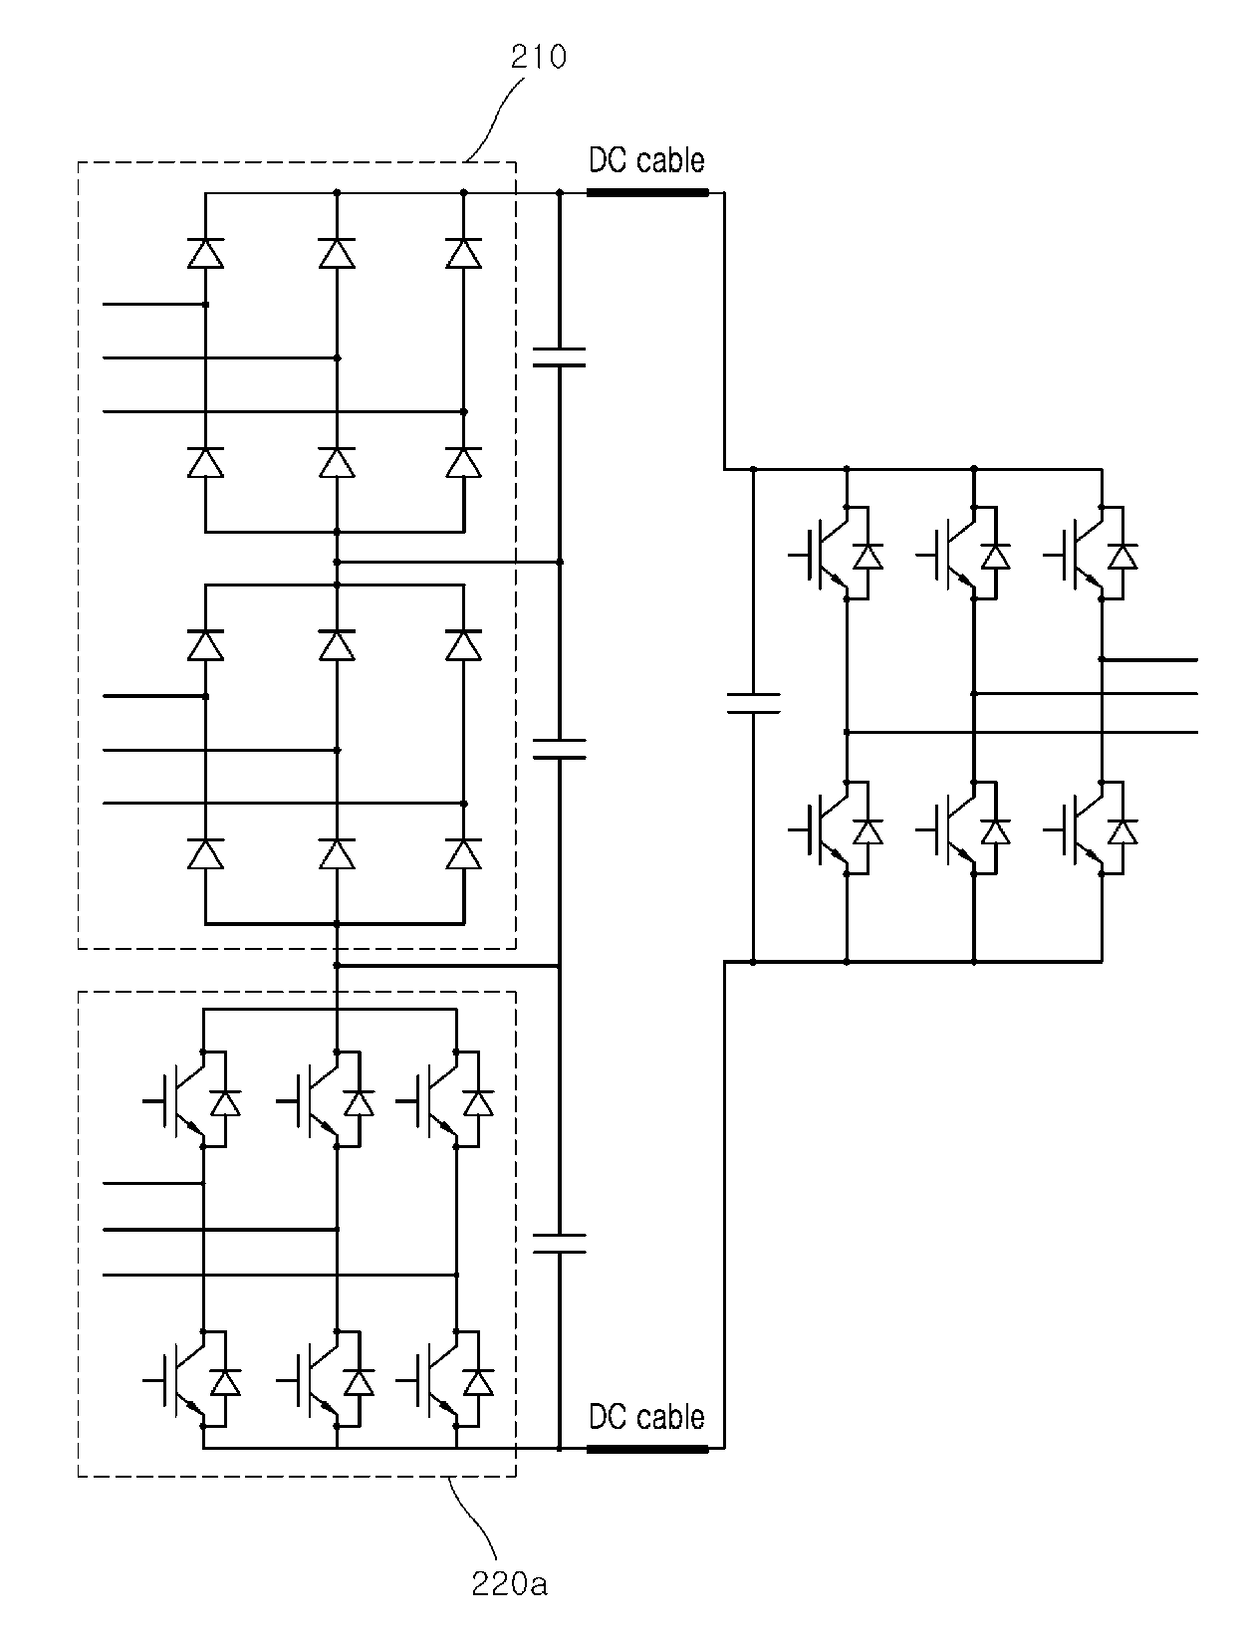 High-voltage direct current converter including a 12-pulse diode recitifier connected in series with a voltage-source converter